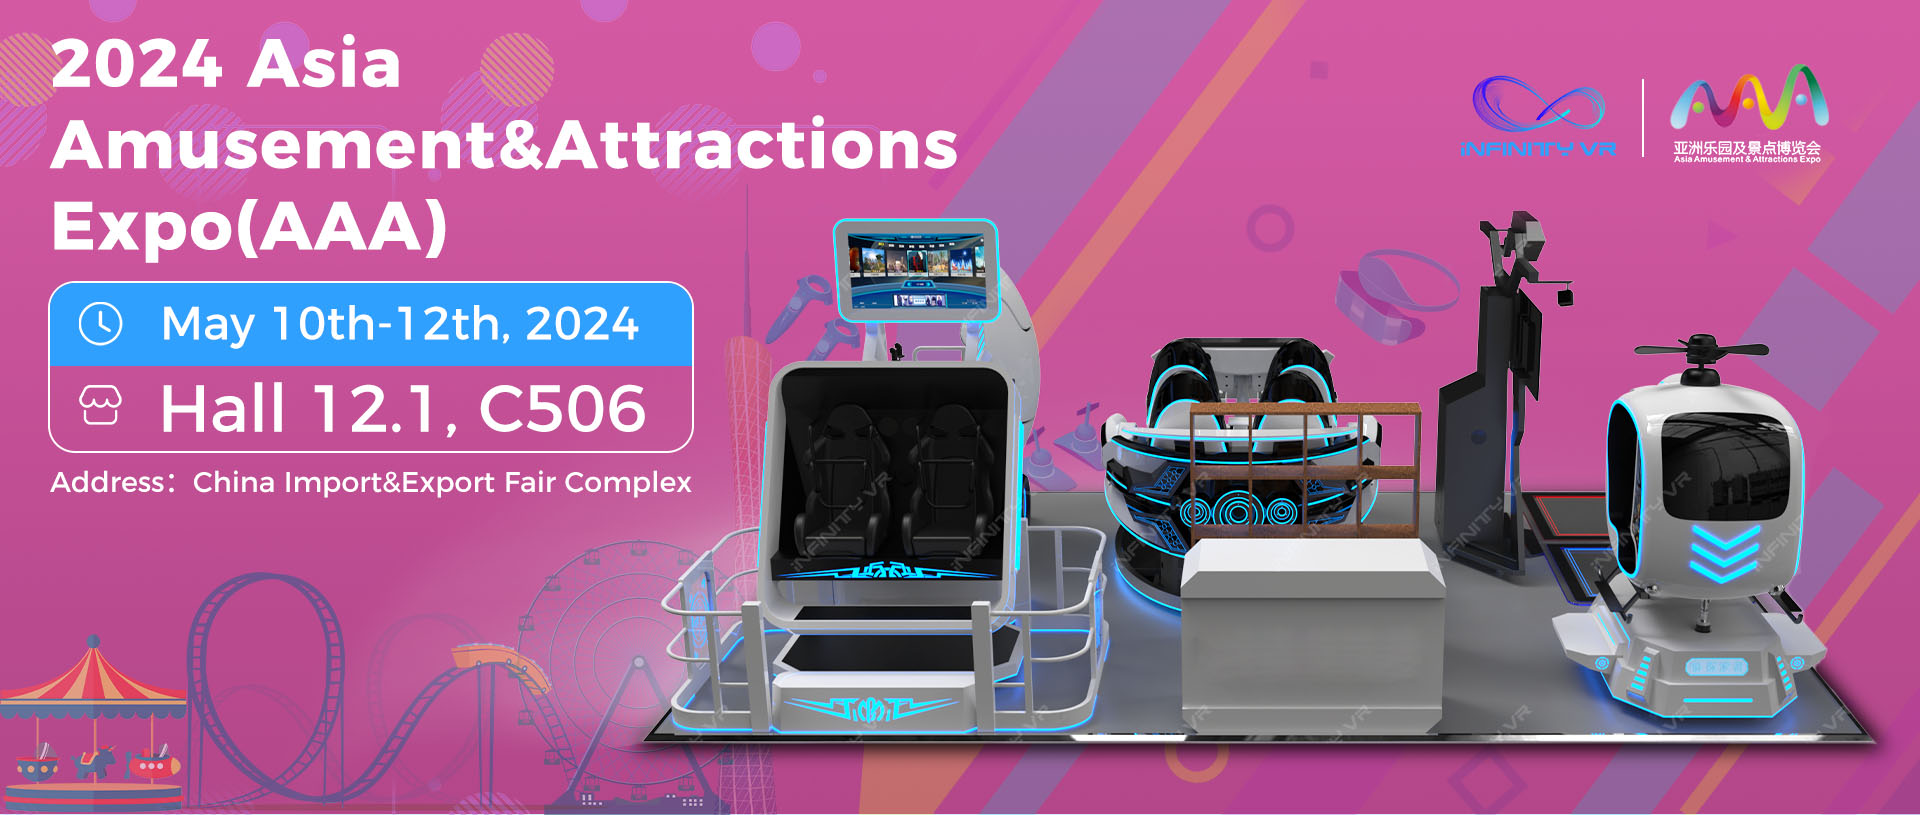 Welcome to Asia Amusement&Attractions Expo. Leave messages to visit us.